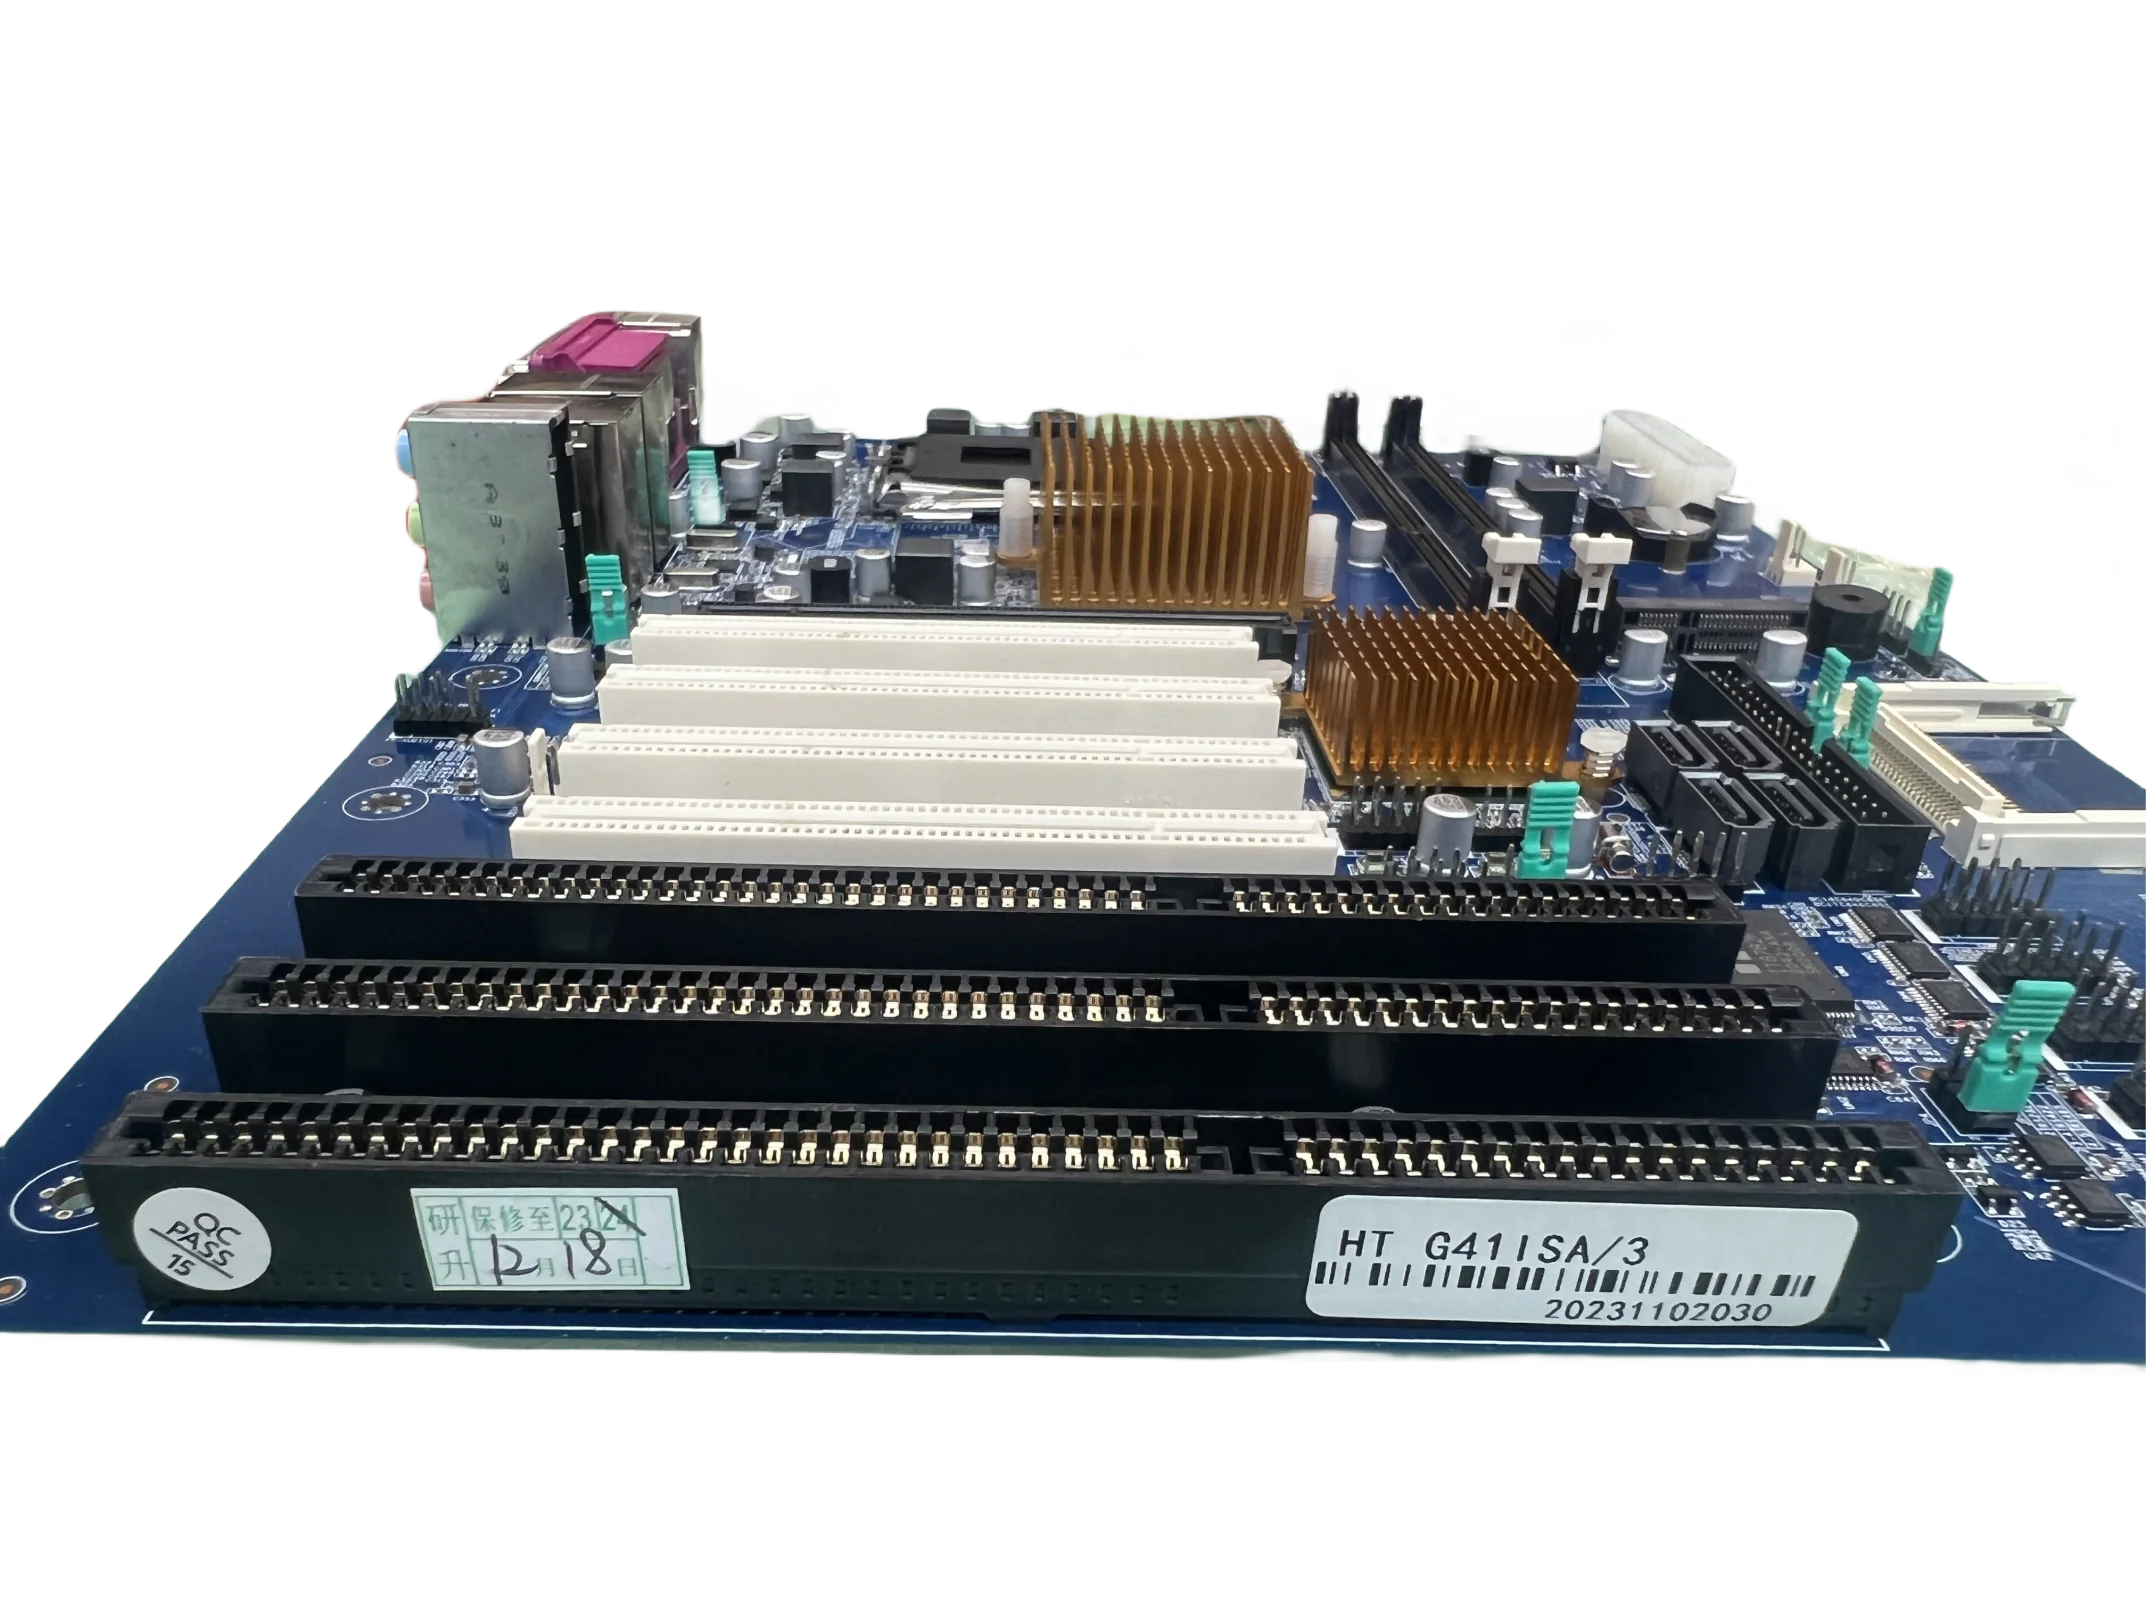 NOWOŚĆ G41 z 3 automatami ISA Industrial Motherboard 4 PCI Dual Network Card